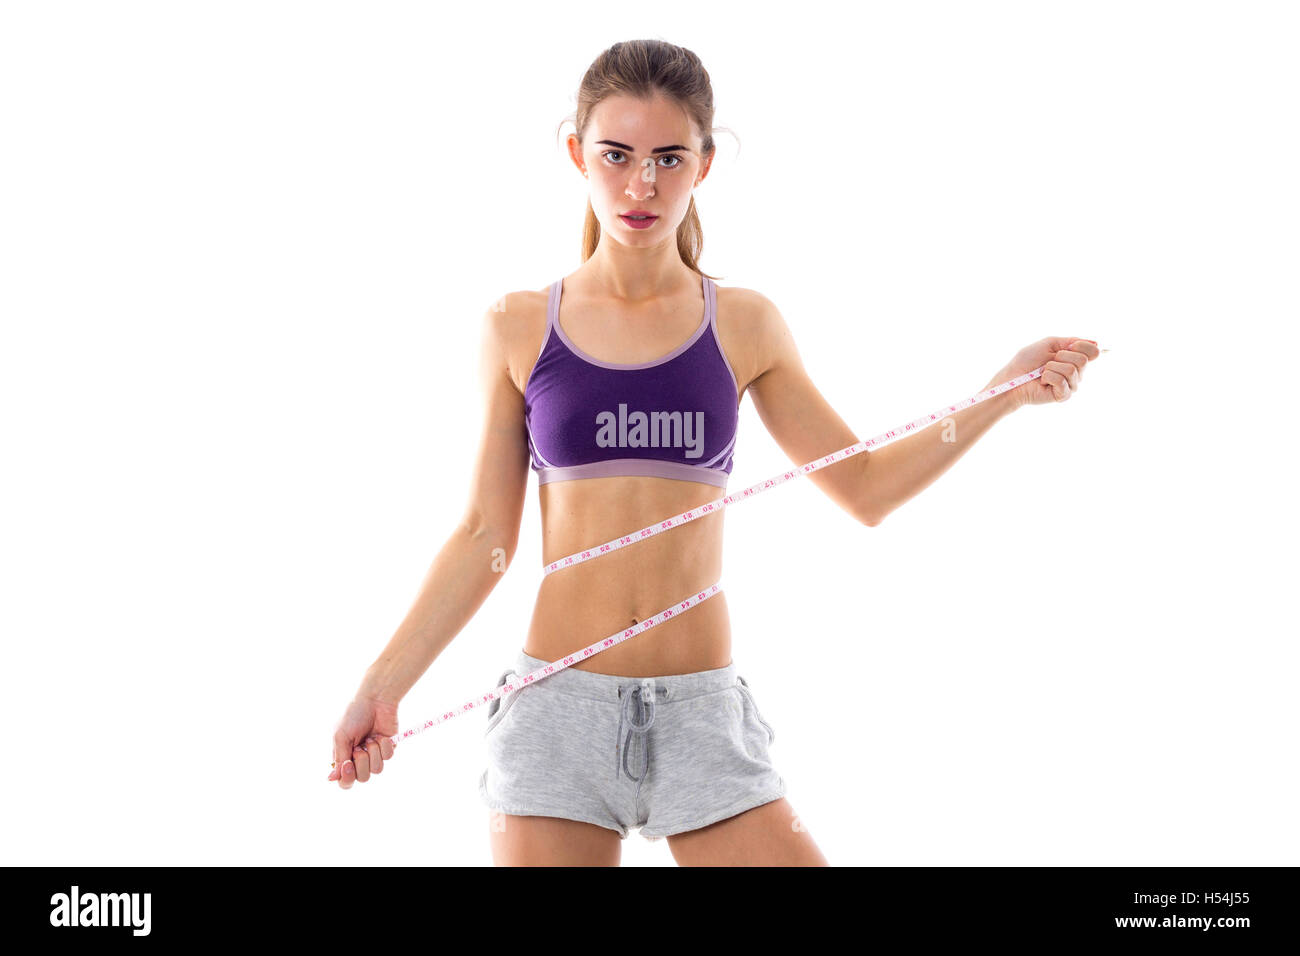 Athletic woman holding cantimeter Stock Photo